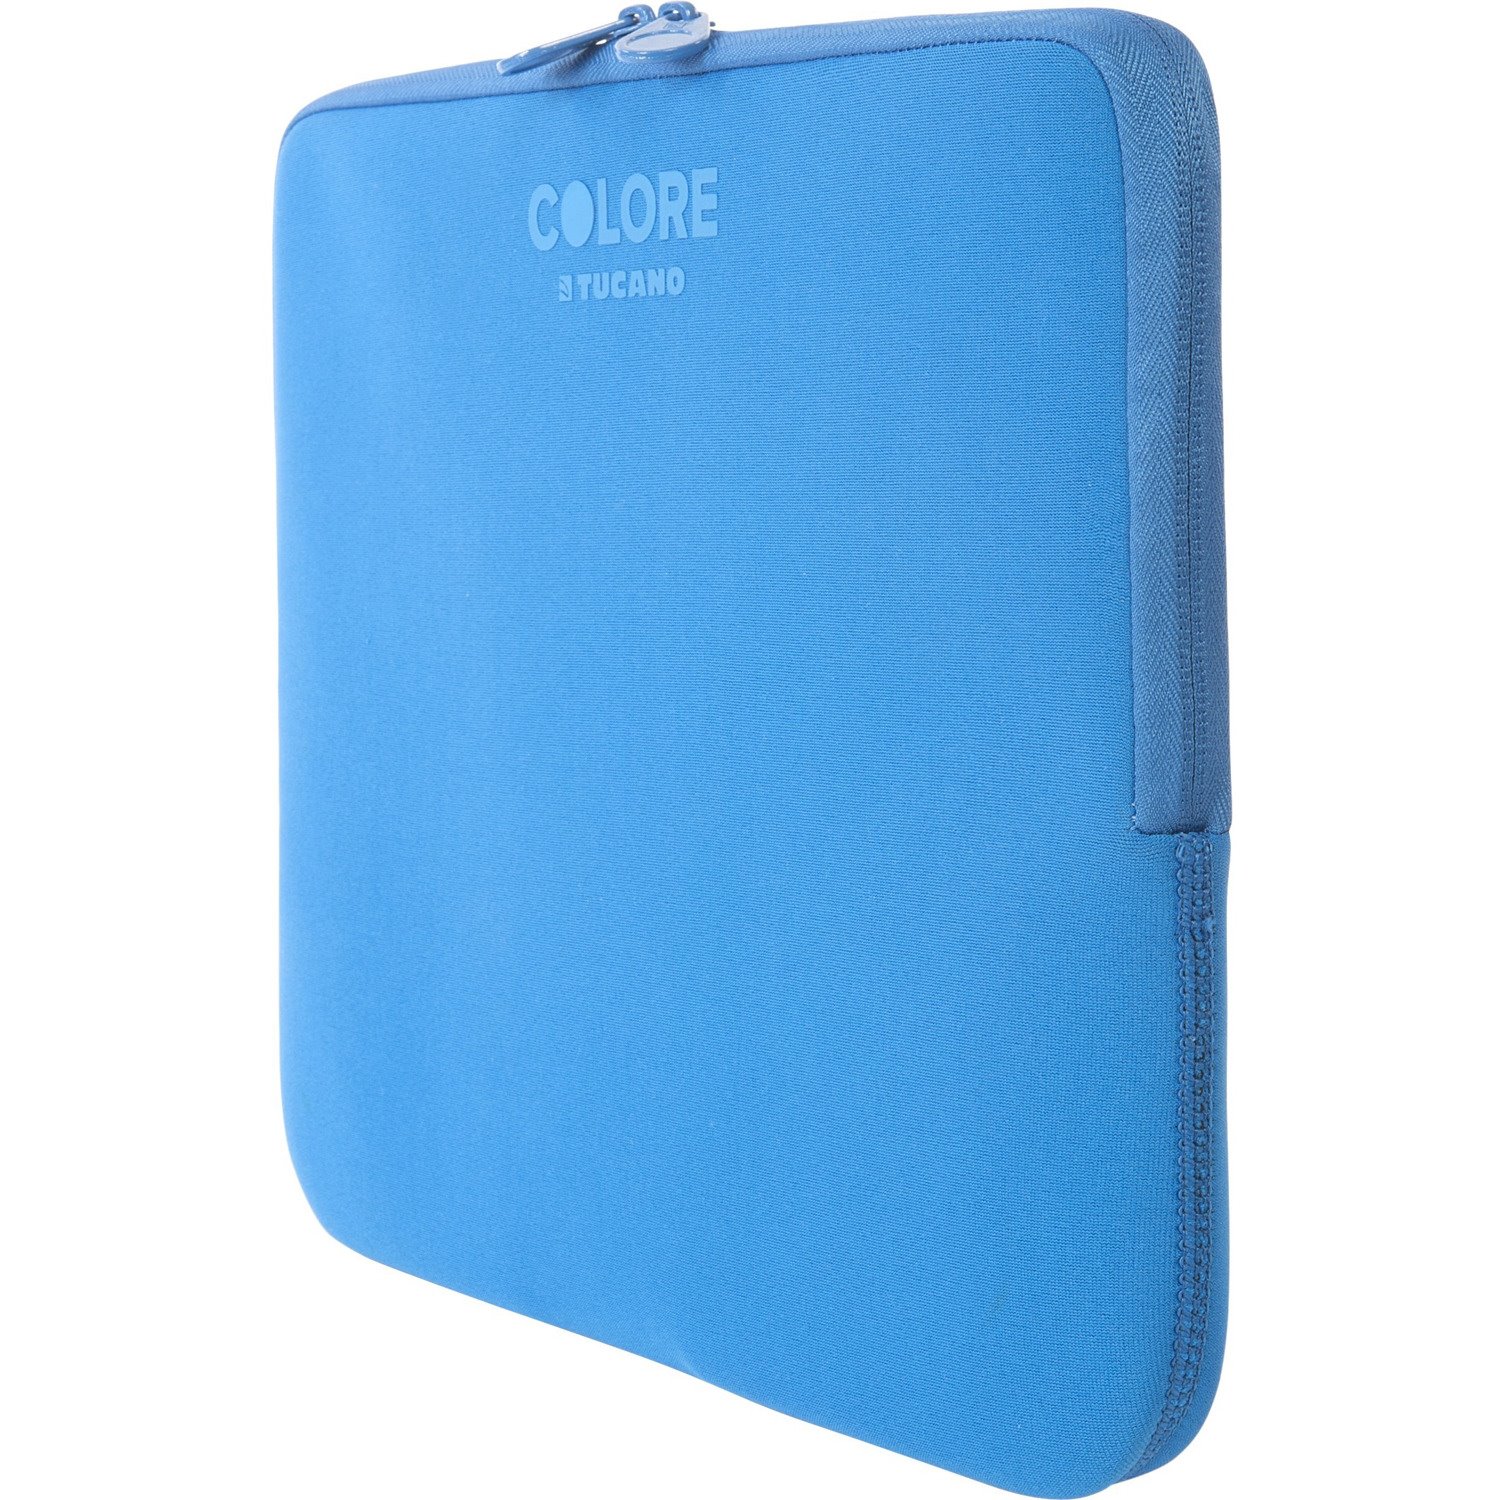 Tucano Colore Second Skin BFC1314 Carrying Case (Sleeve) for 35.8 cm (14.1") Notebook - Blue